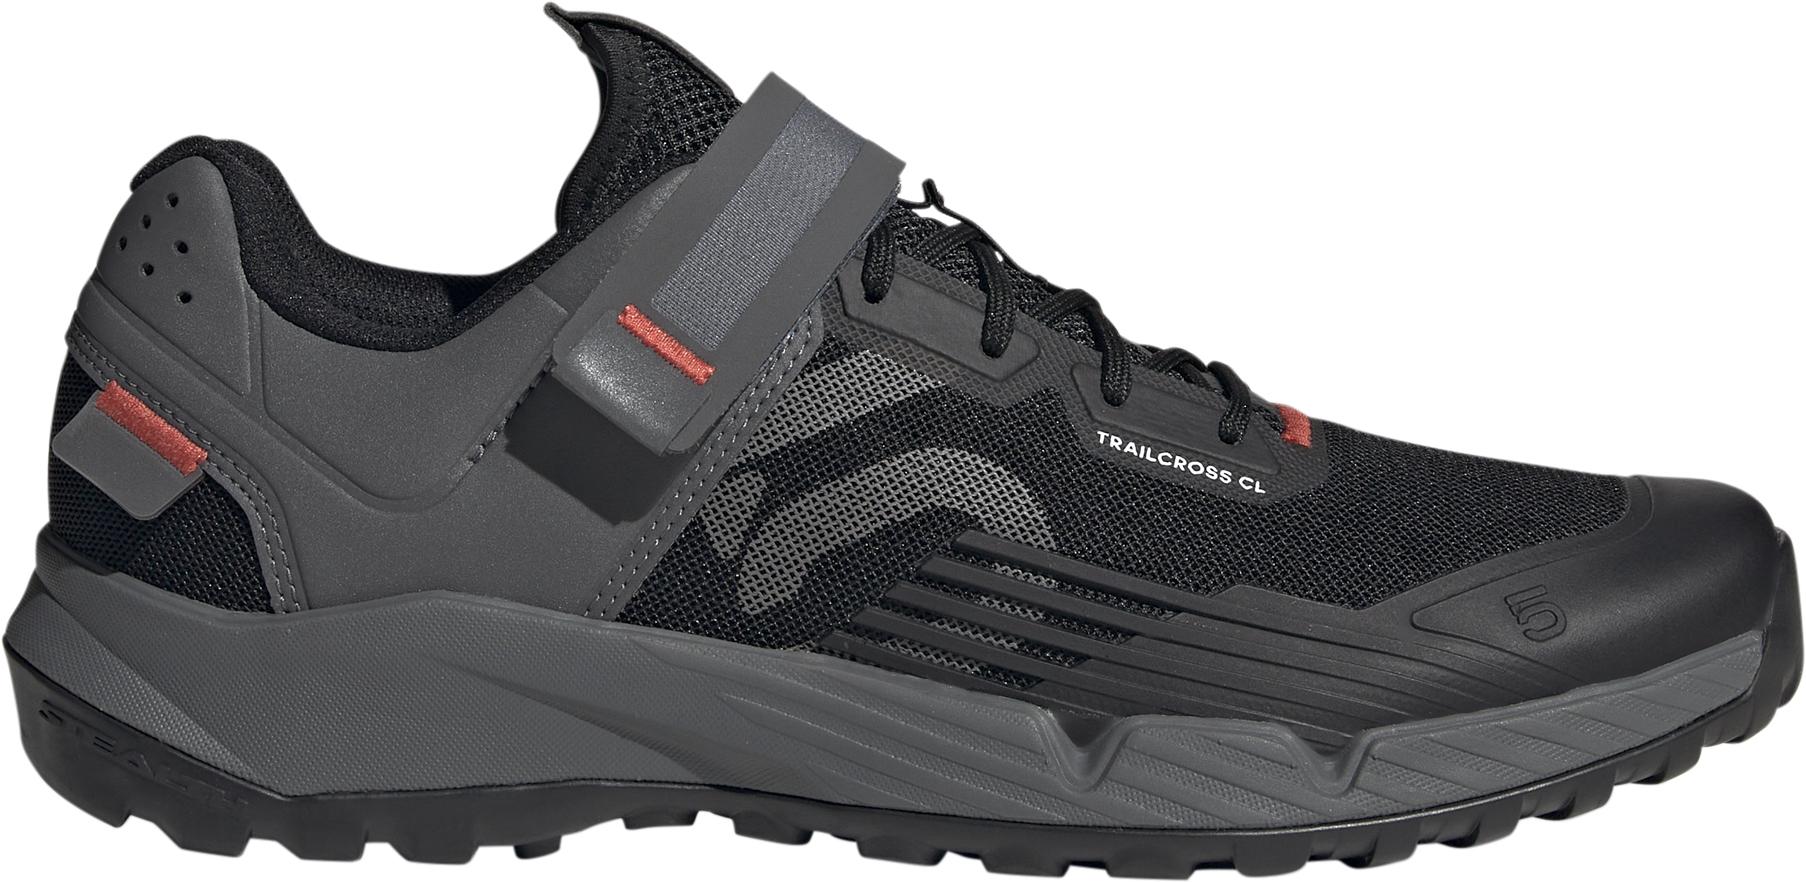 Five Ten Trailcross Cli Clip-in Cycle Shoes - Core Black/grey Three/red